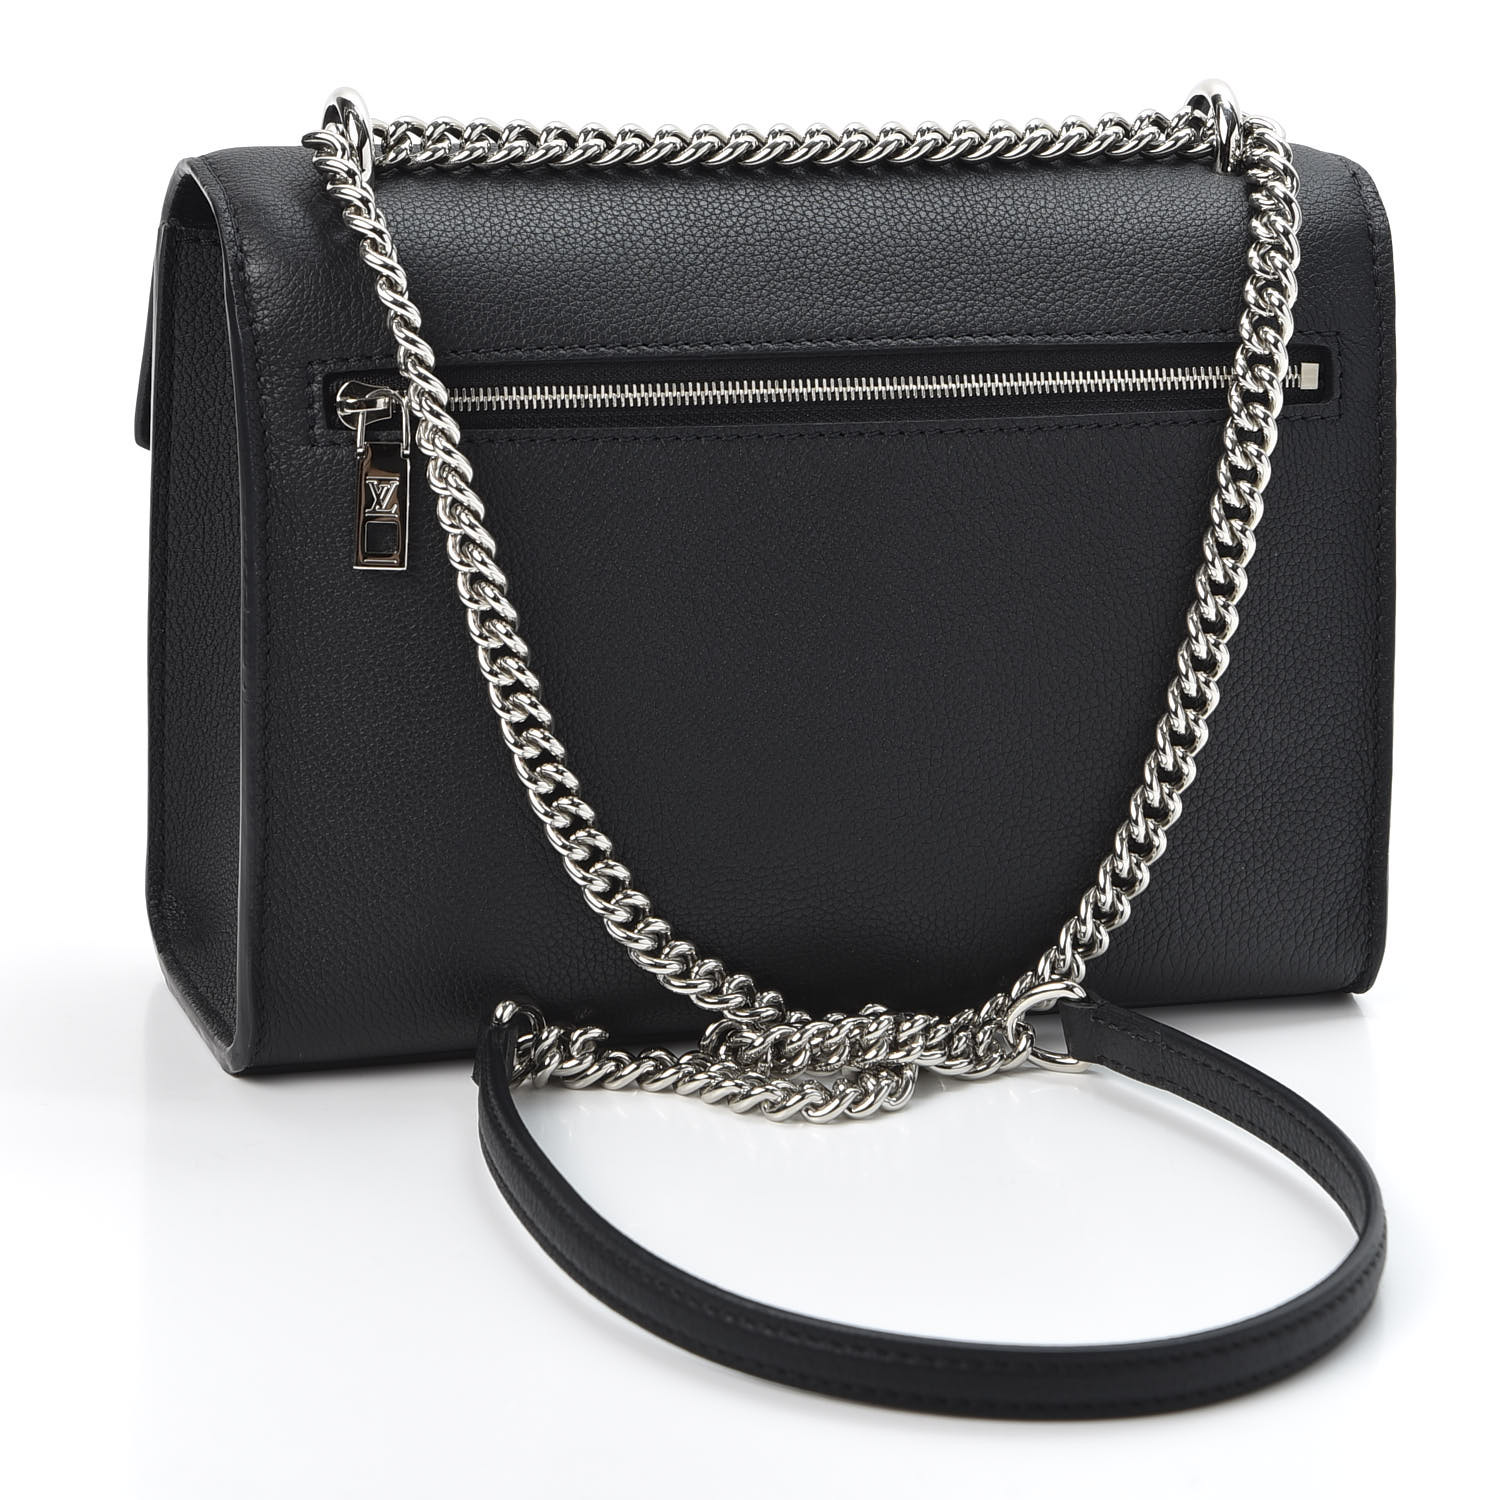 Eluxury Company - The Lockme Chain PM handbag is made from grained calf  leather. Its sleek lines are signed with the iconic LV turn lock,  reimagined in a stylish facetted design. It